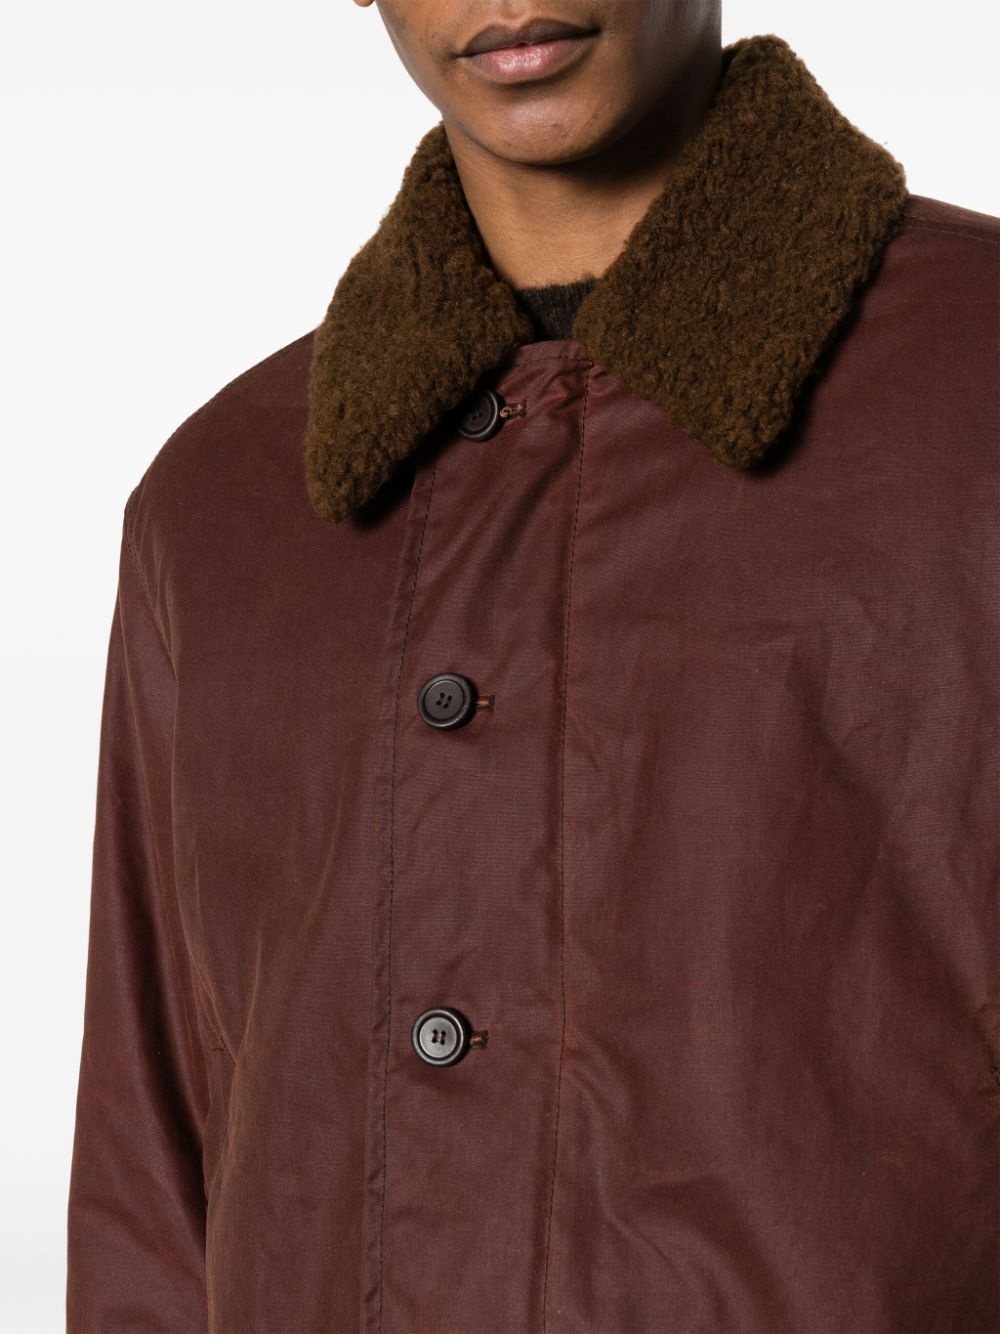 Grizzly wax-coated jacket - 5